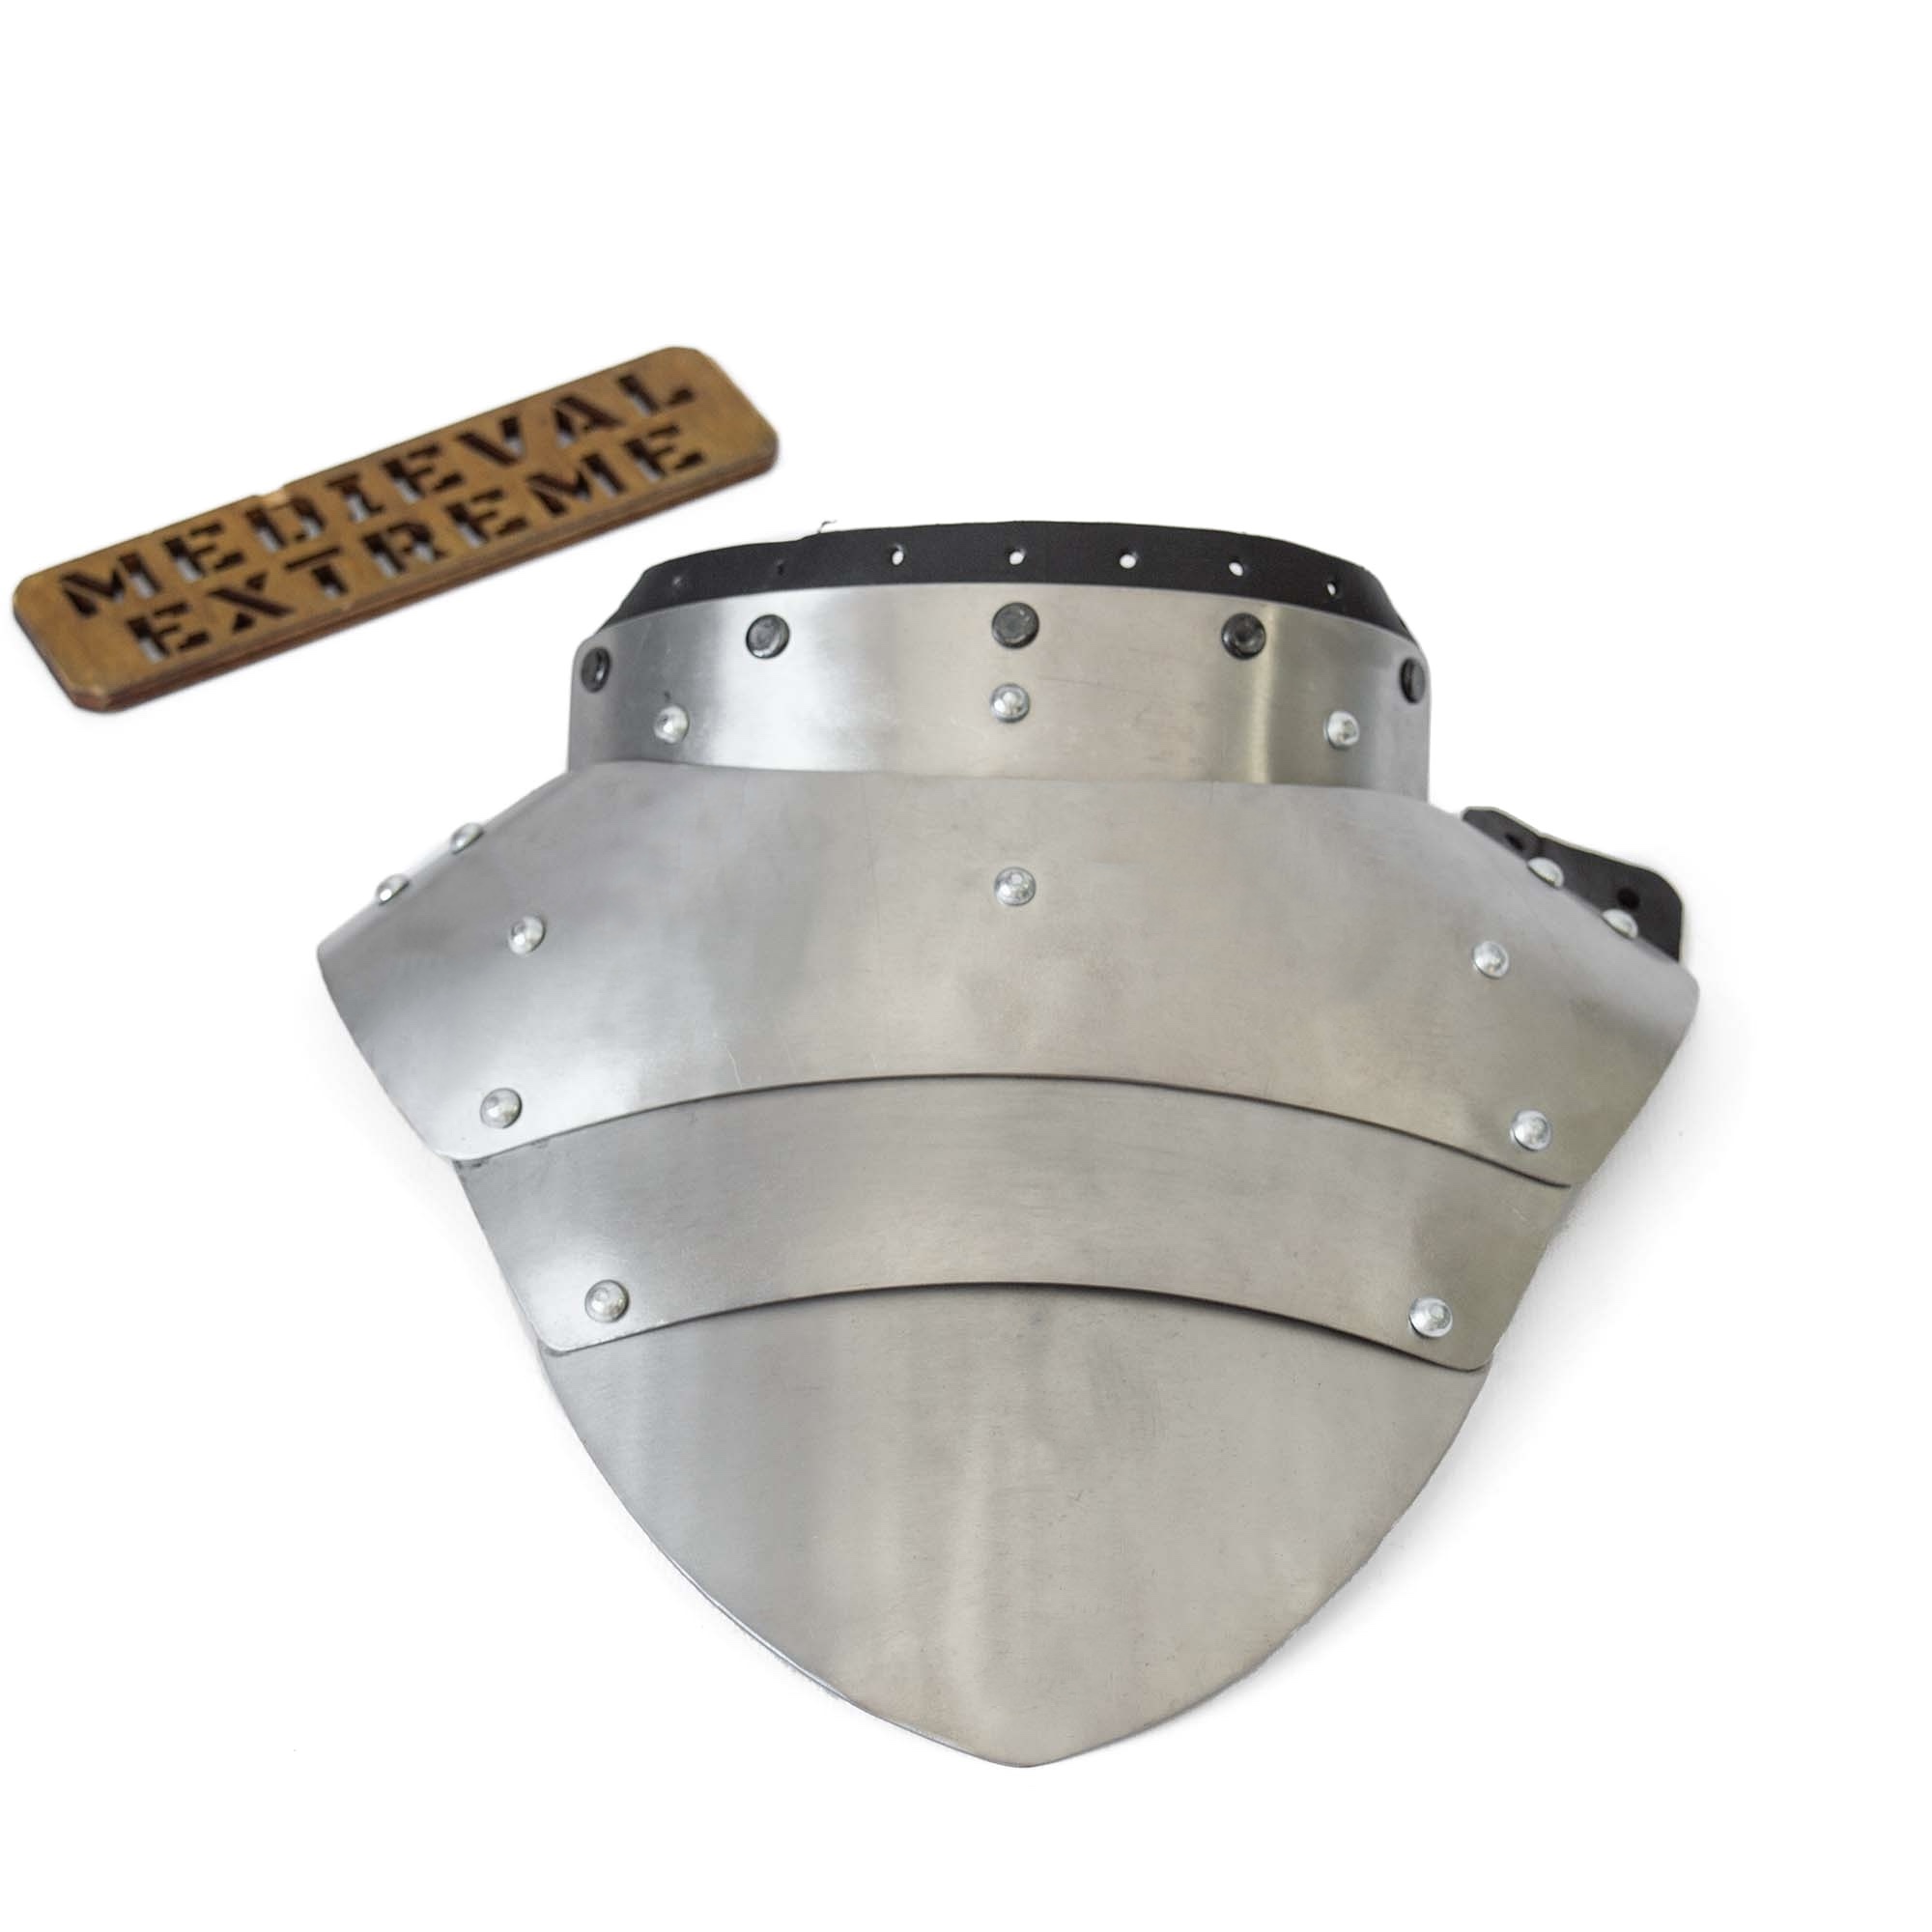 Neck protector for armored combat on the flat